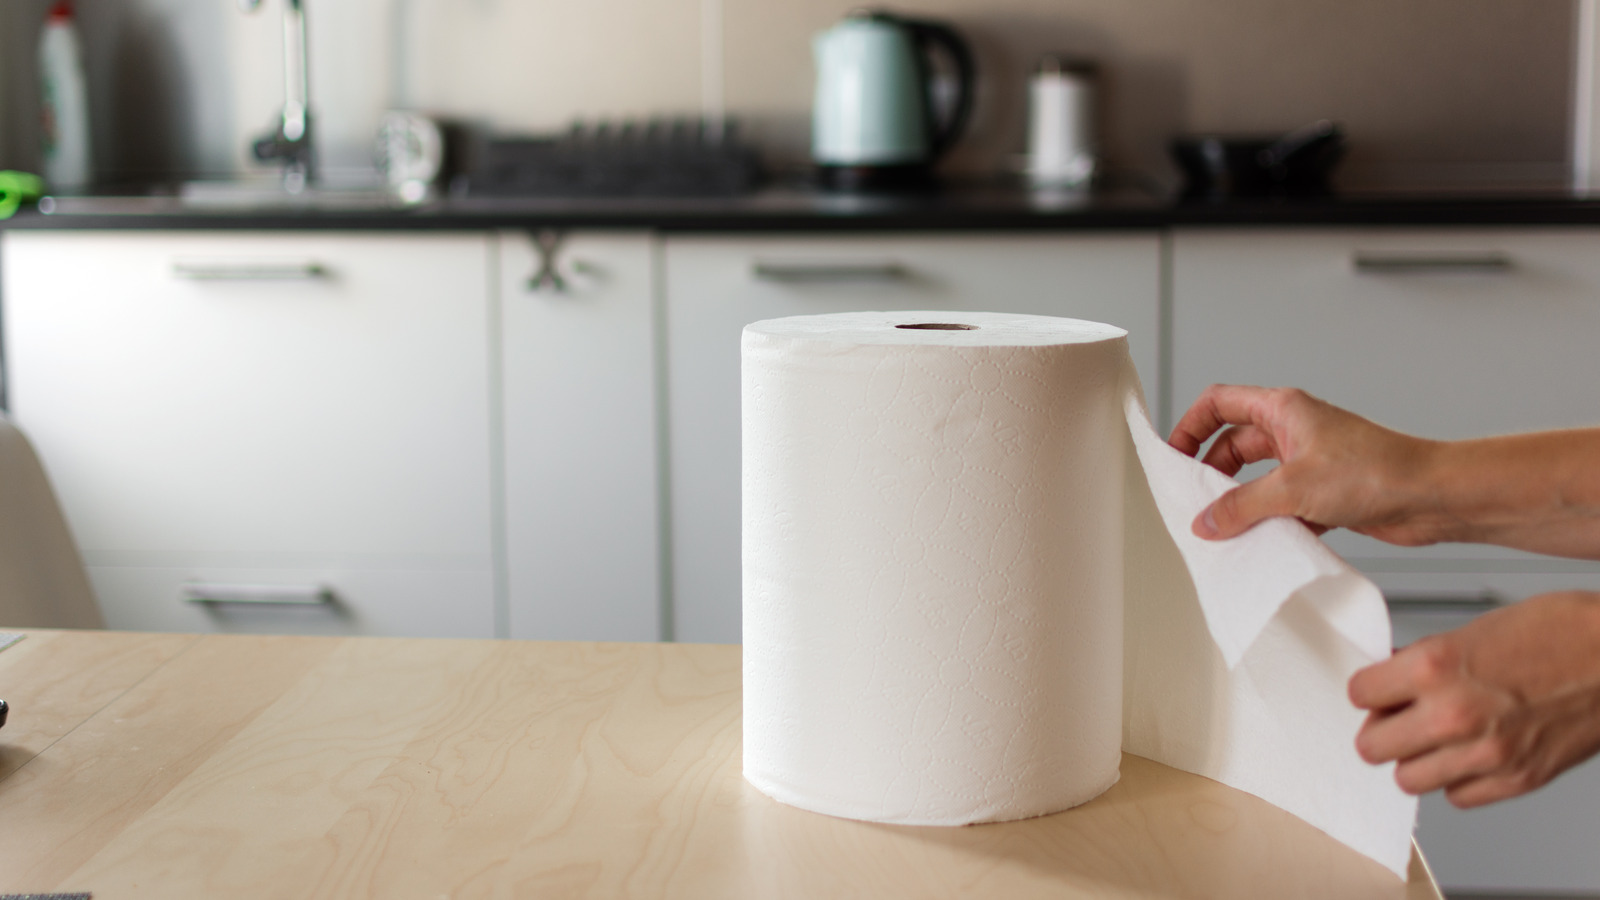 How To Make Your Own Reusable Paper Towels